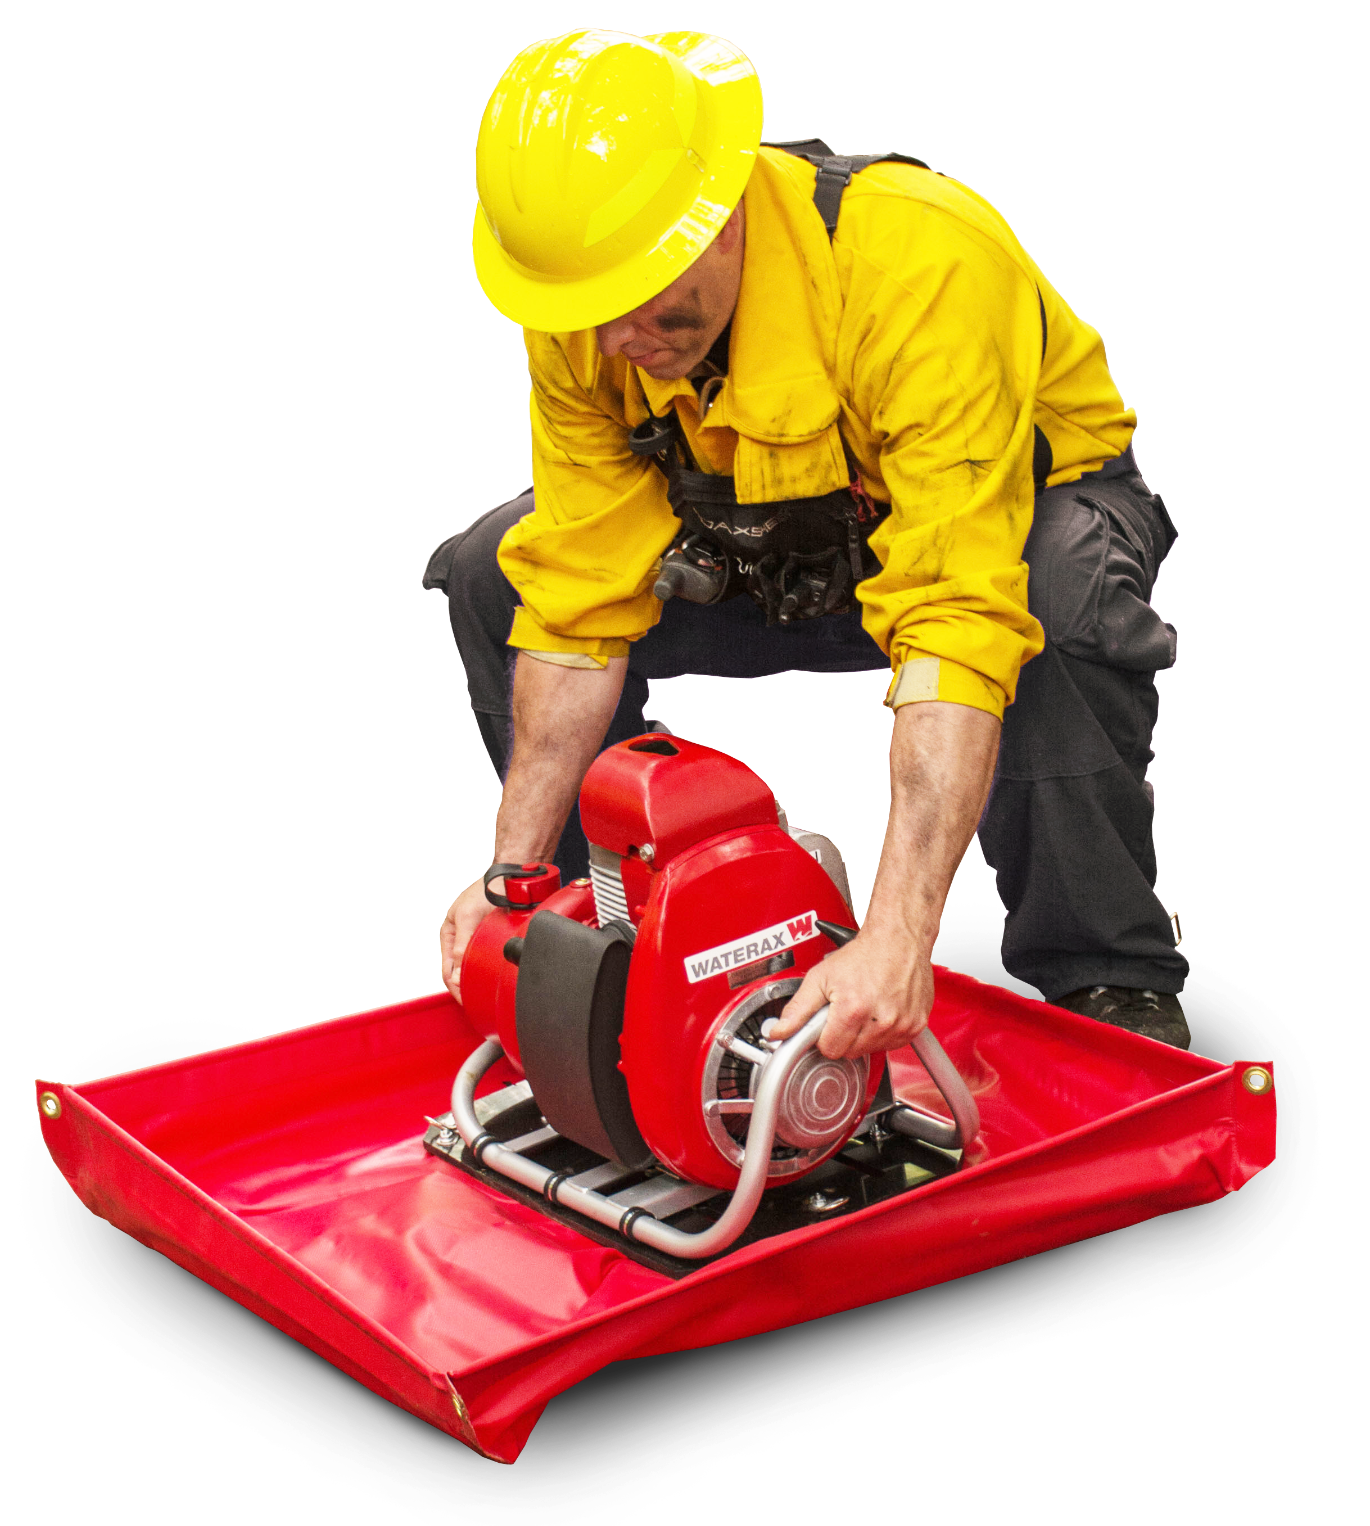 Firefighter with MARK-3® pump